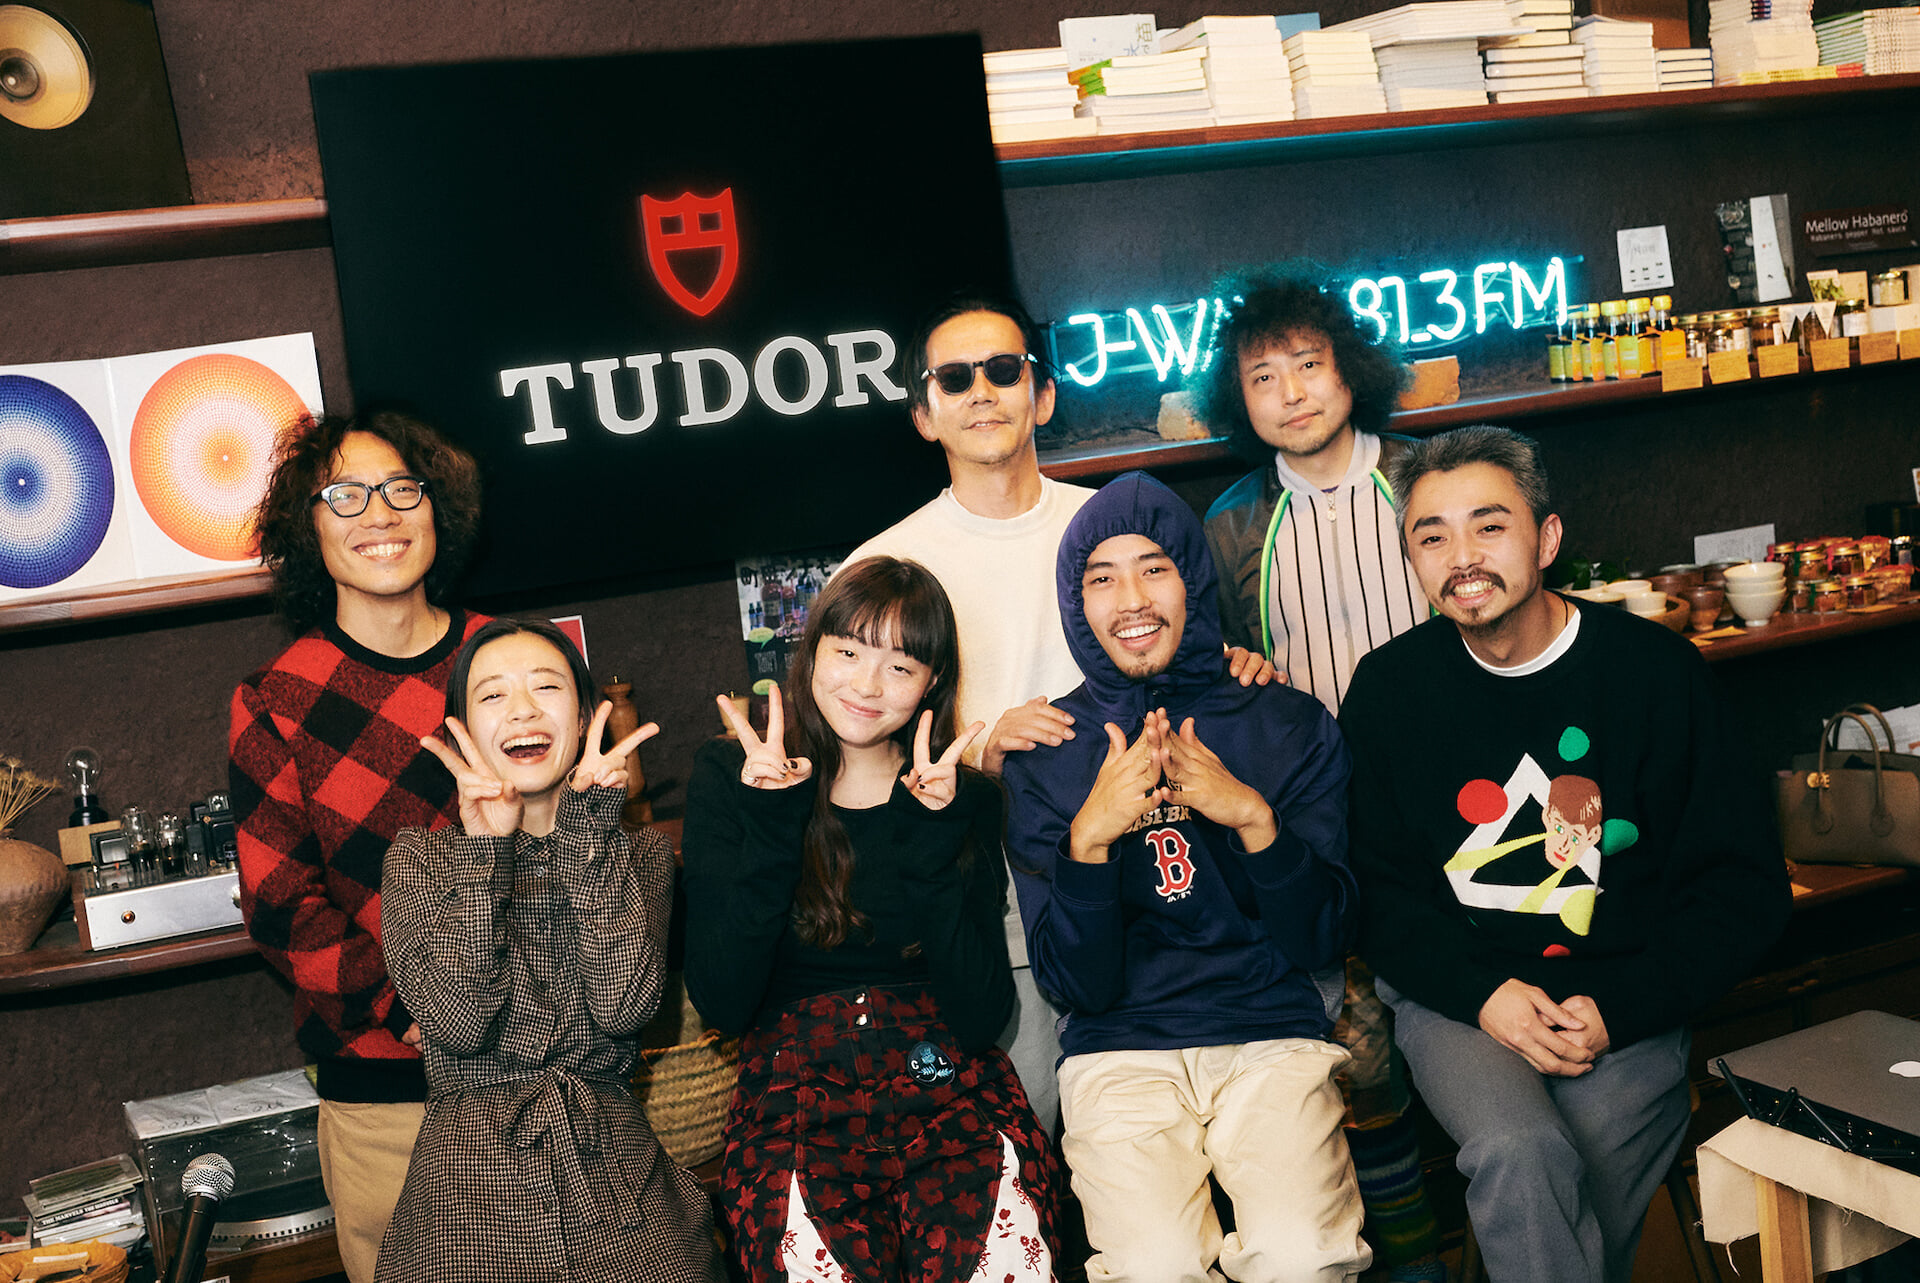 J-WAVE YEAR END SPECIAL TUDOR CLOSING TIME